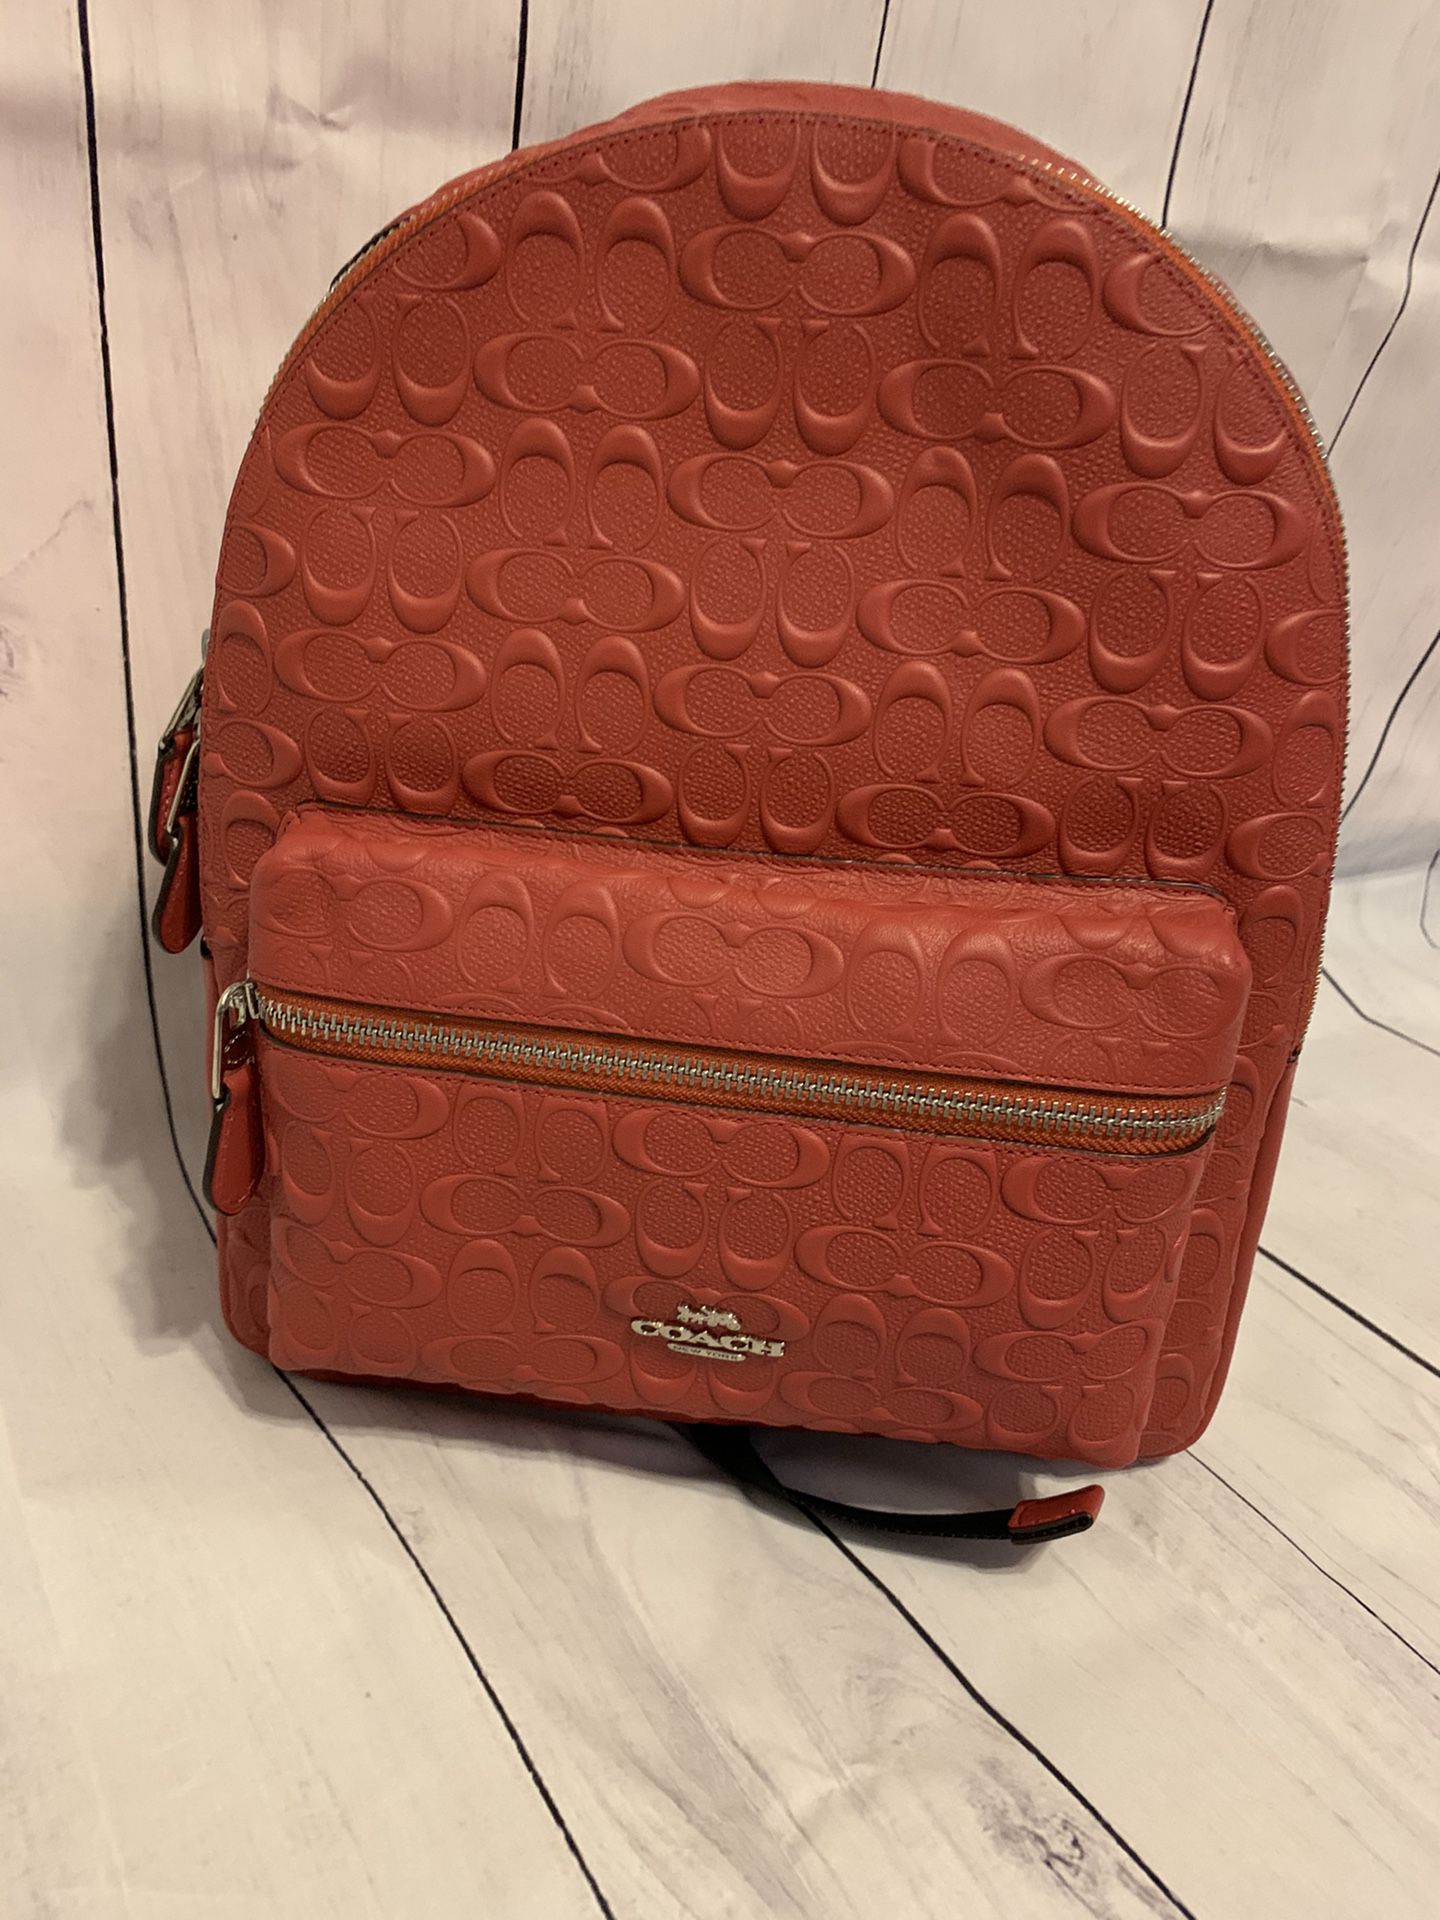 Brand new Coach Leather Backpack with tags